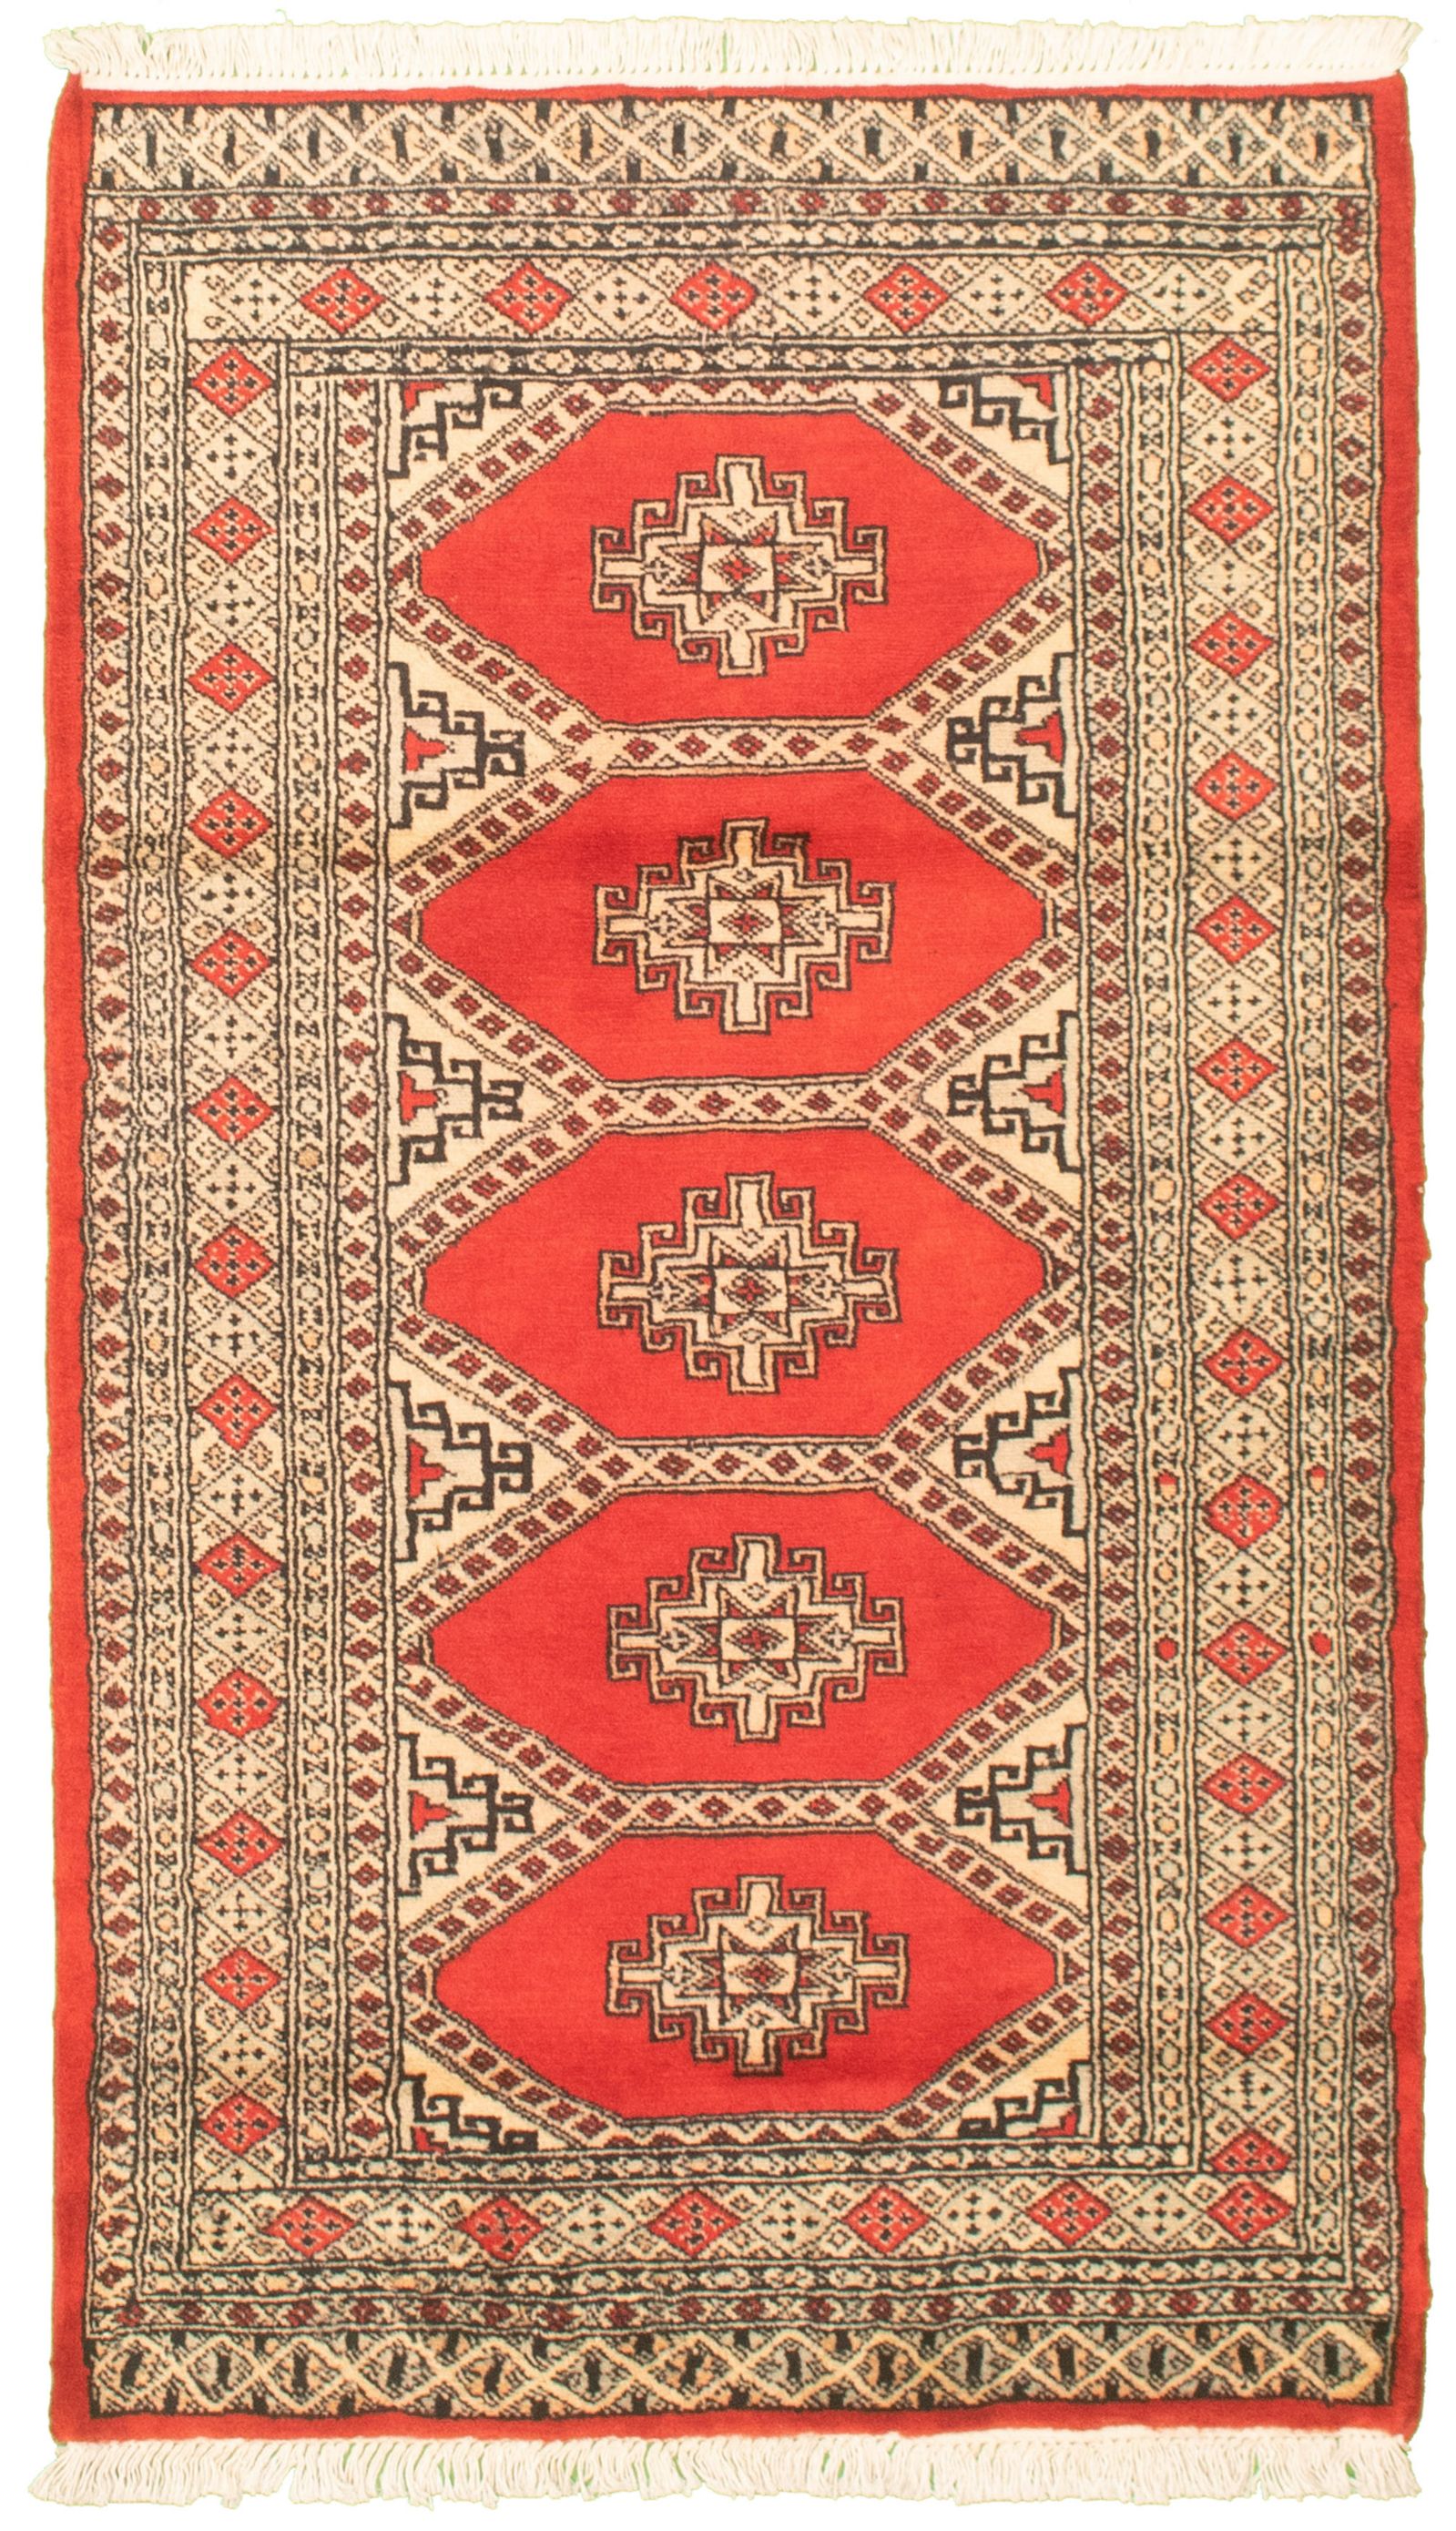 Hand-knotted Finest Peshawar Bokhara Red Wool Rug 3'1" x 5'5"  Size: 3'1" x 5'5"  